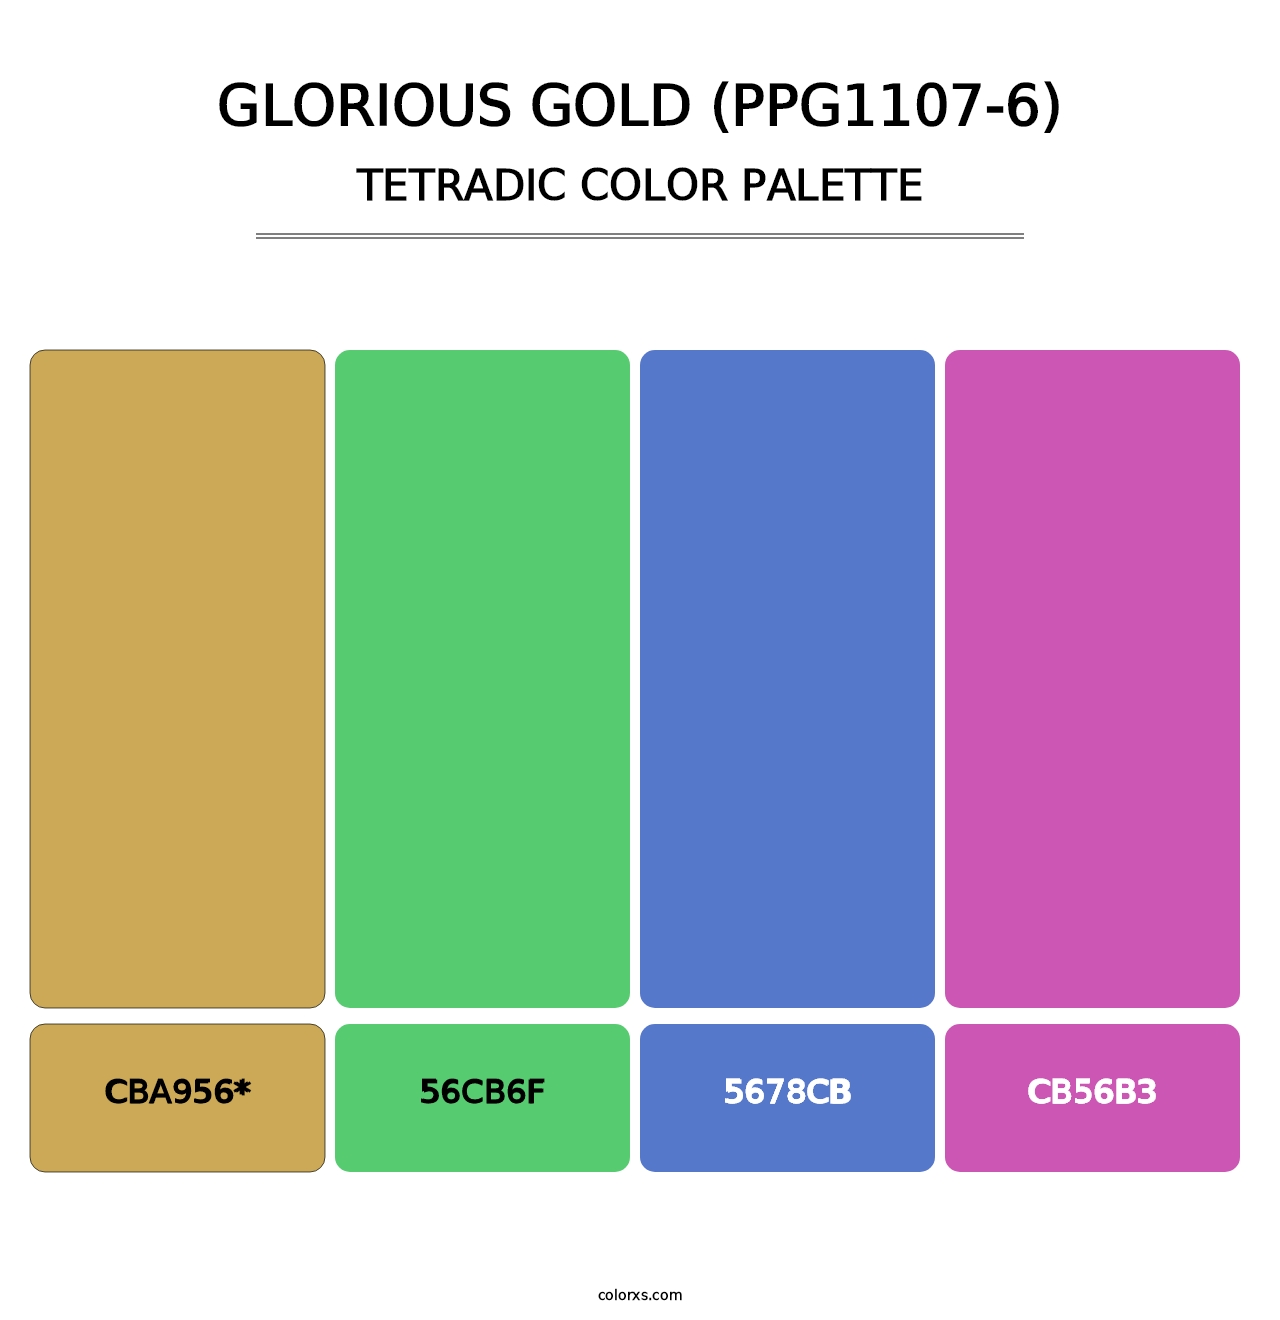 Glorious Gold (PPG1107-6) - Tetradic Color Palette